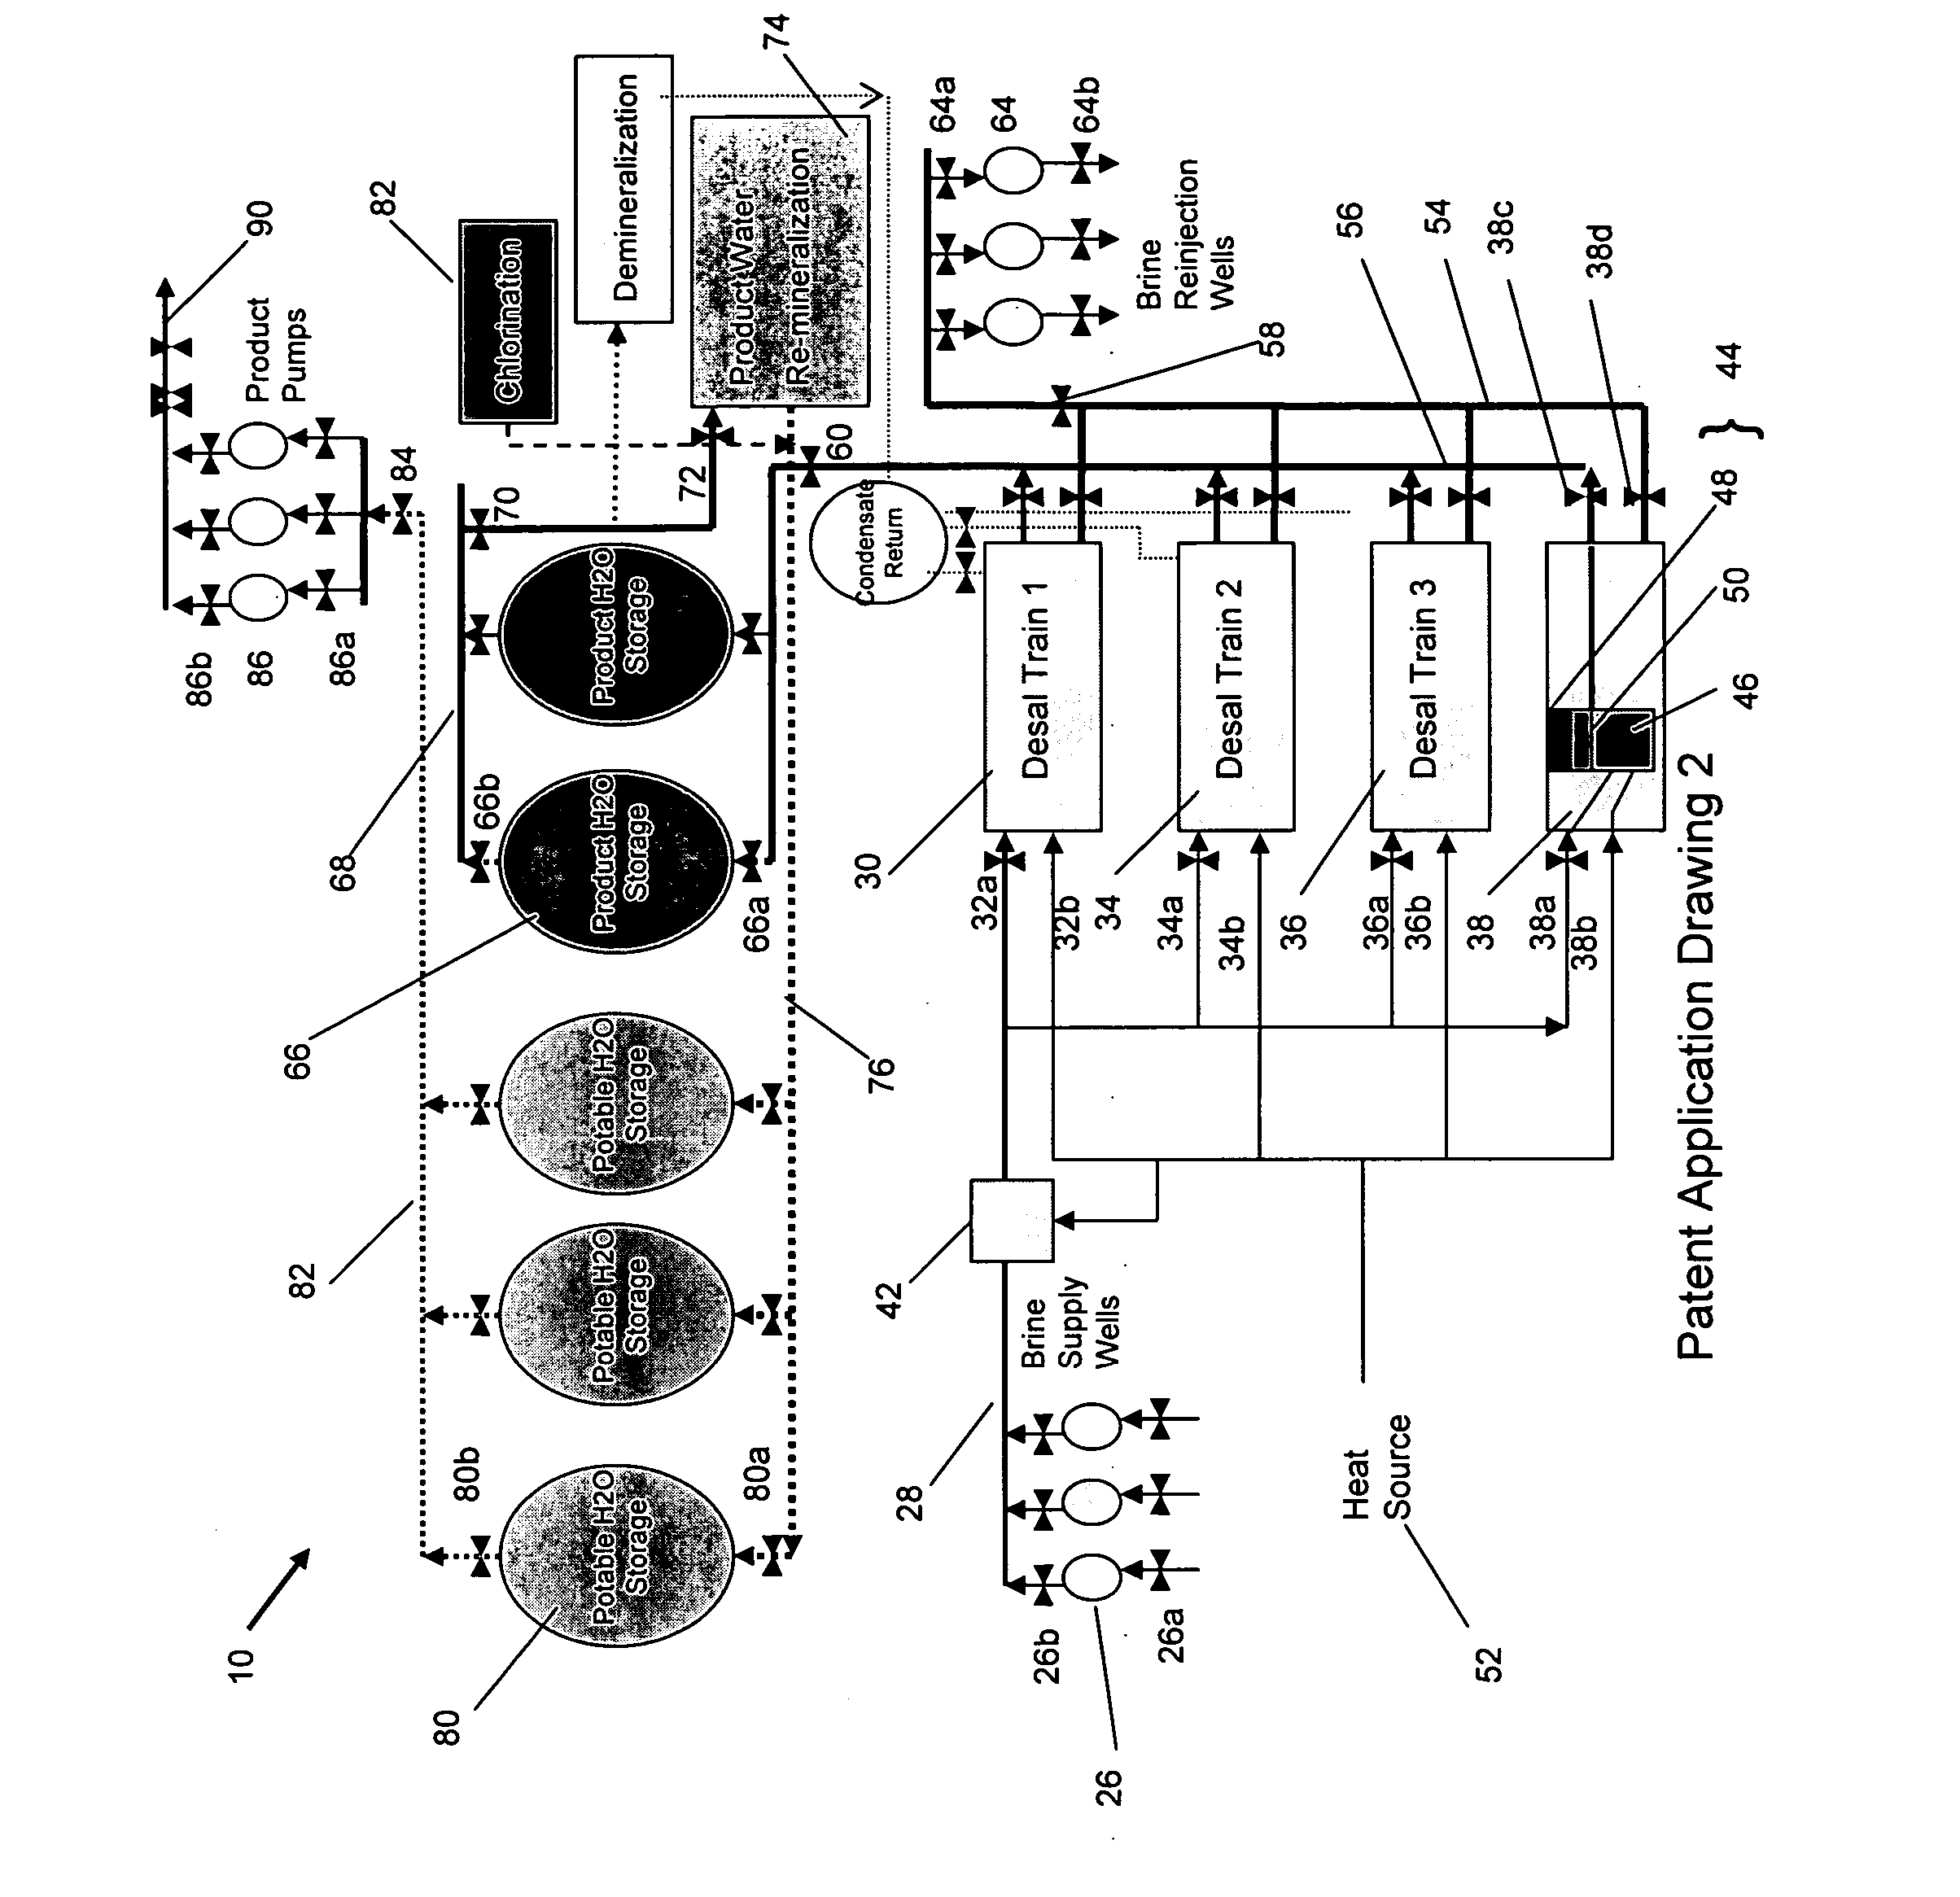 Method and apparatus for desalinating water combined with power generation